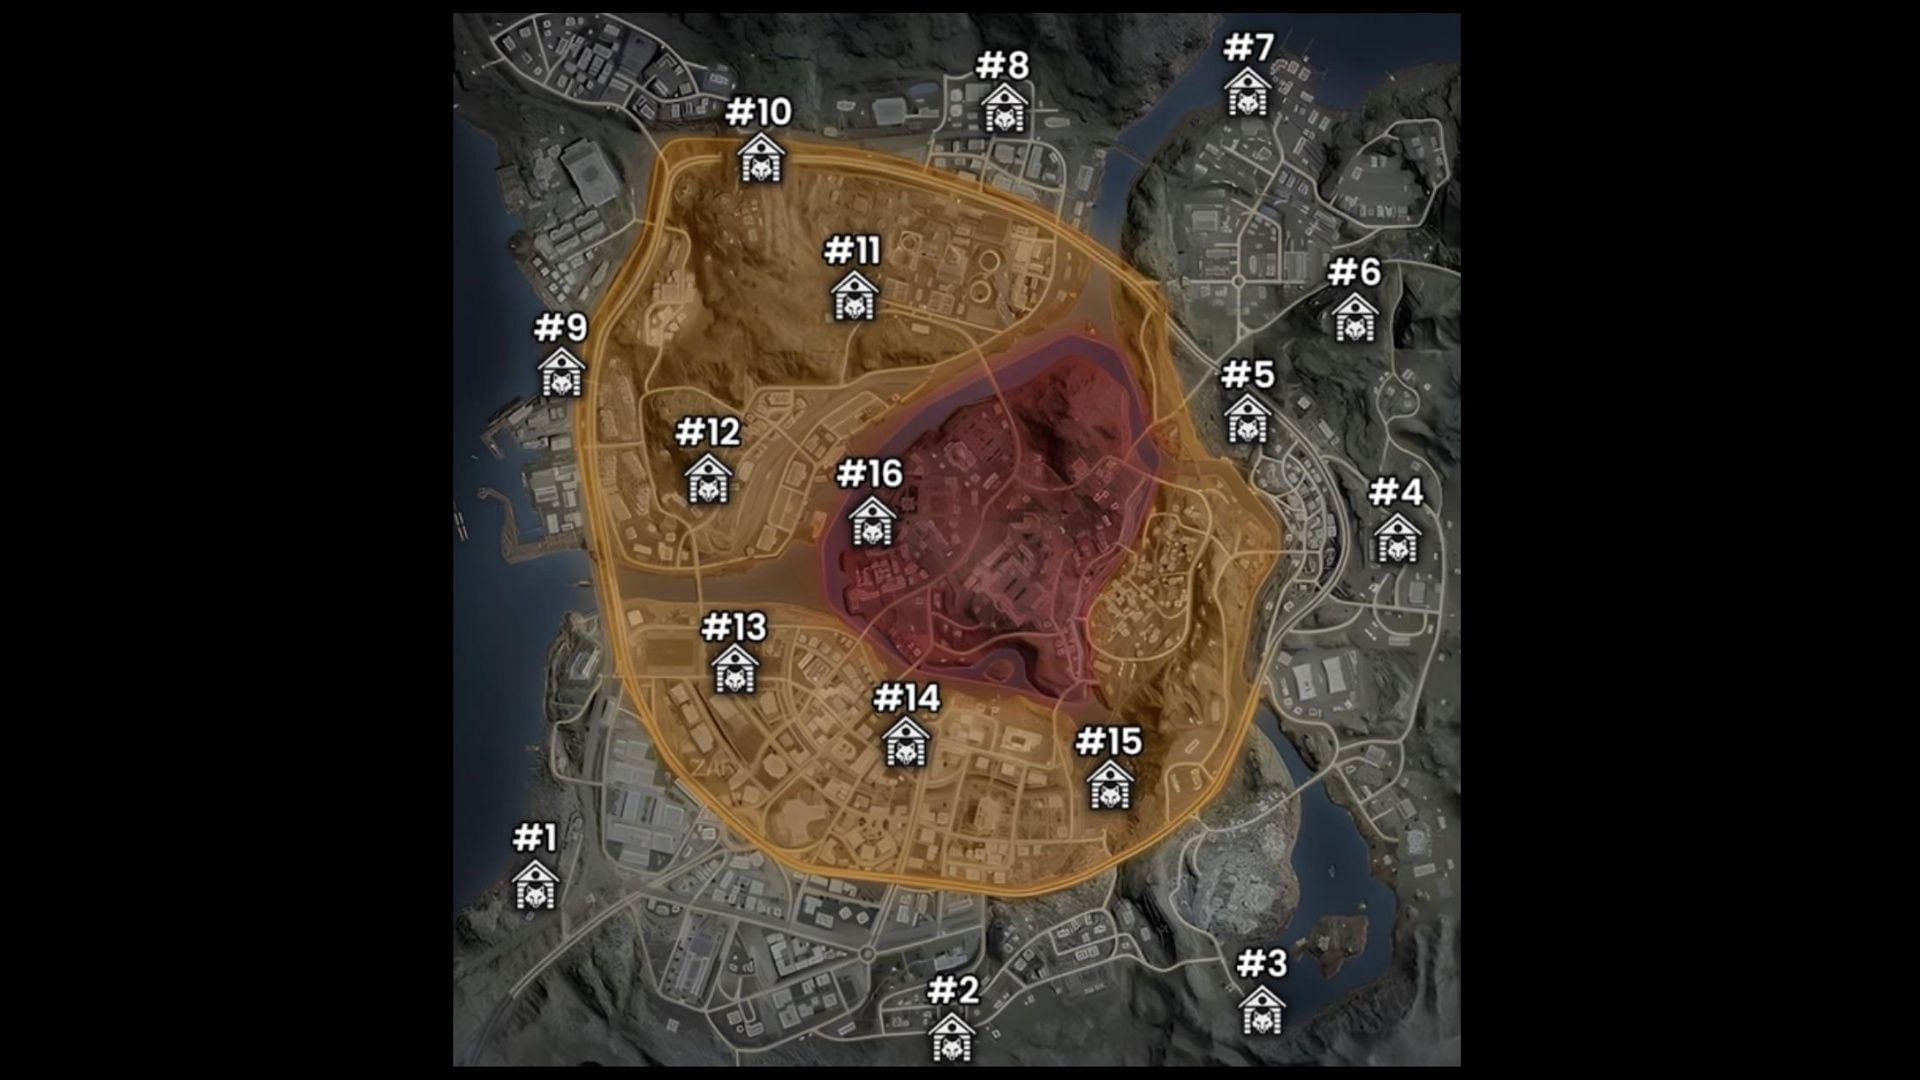 All Doghouse locations in MW3 Zombies (Image via Activision and reddit.com/user/funkymunkey66661)